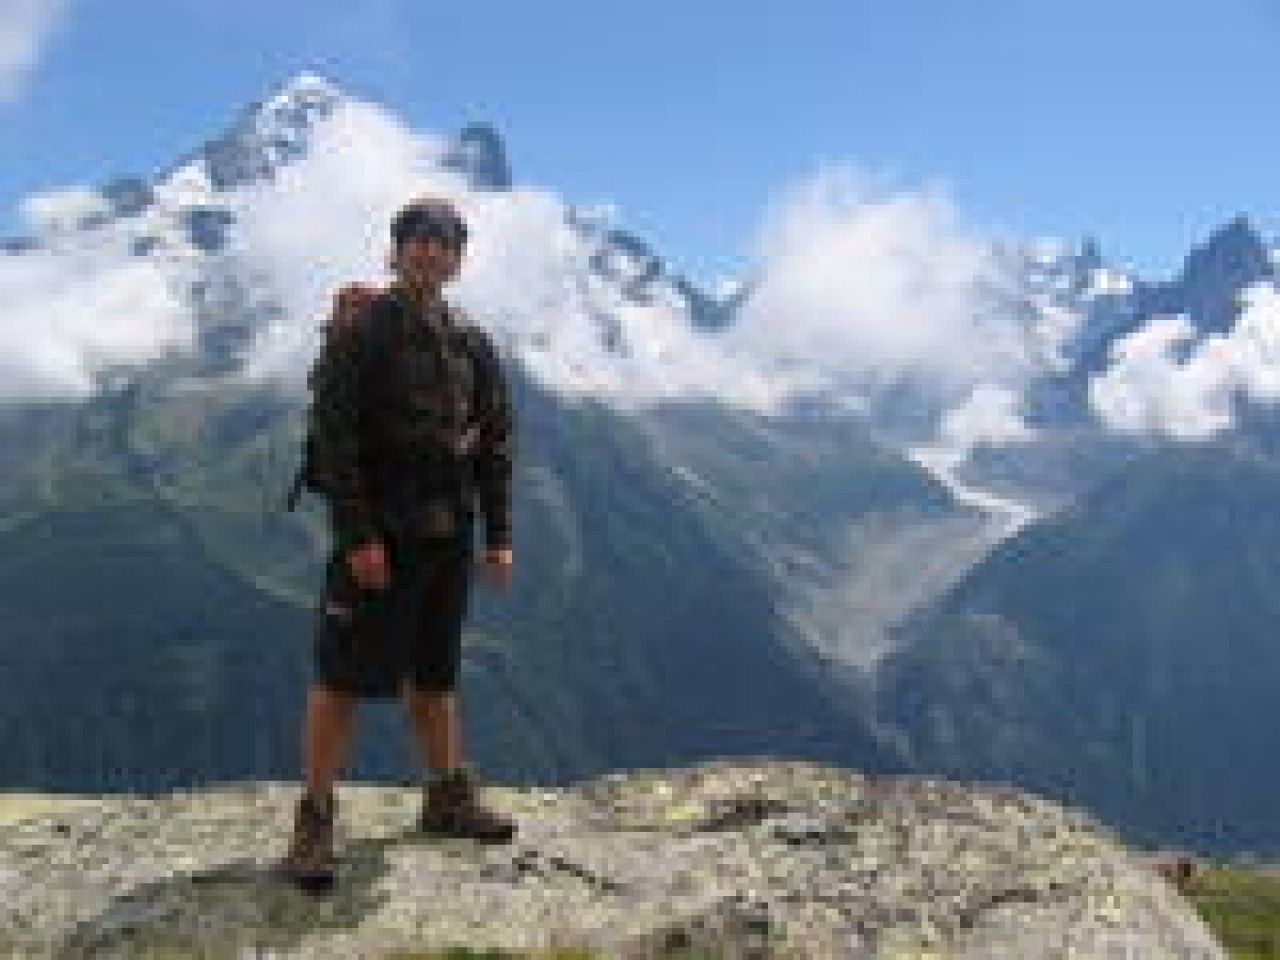 Cody with Mont Blanc Massif behind